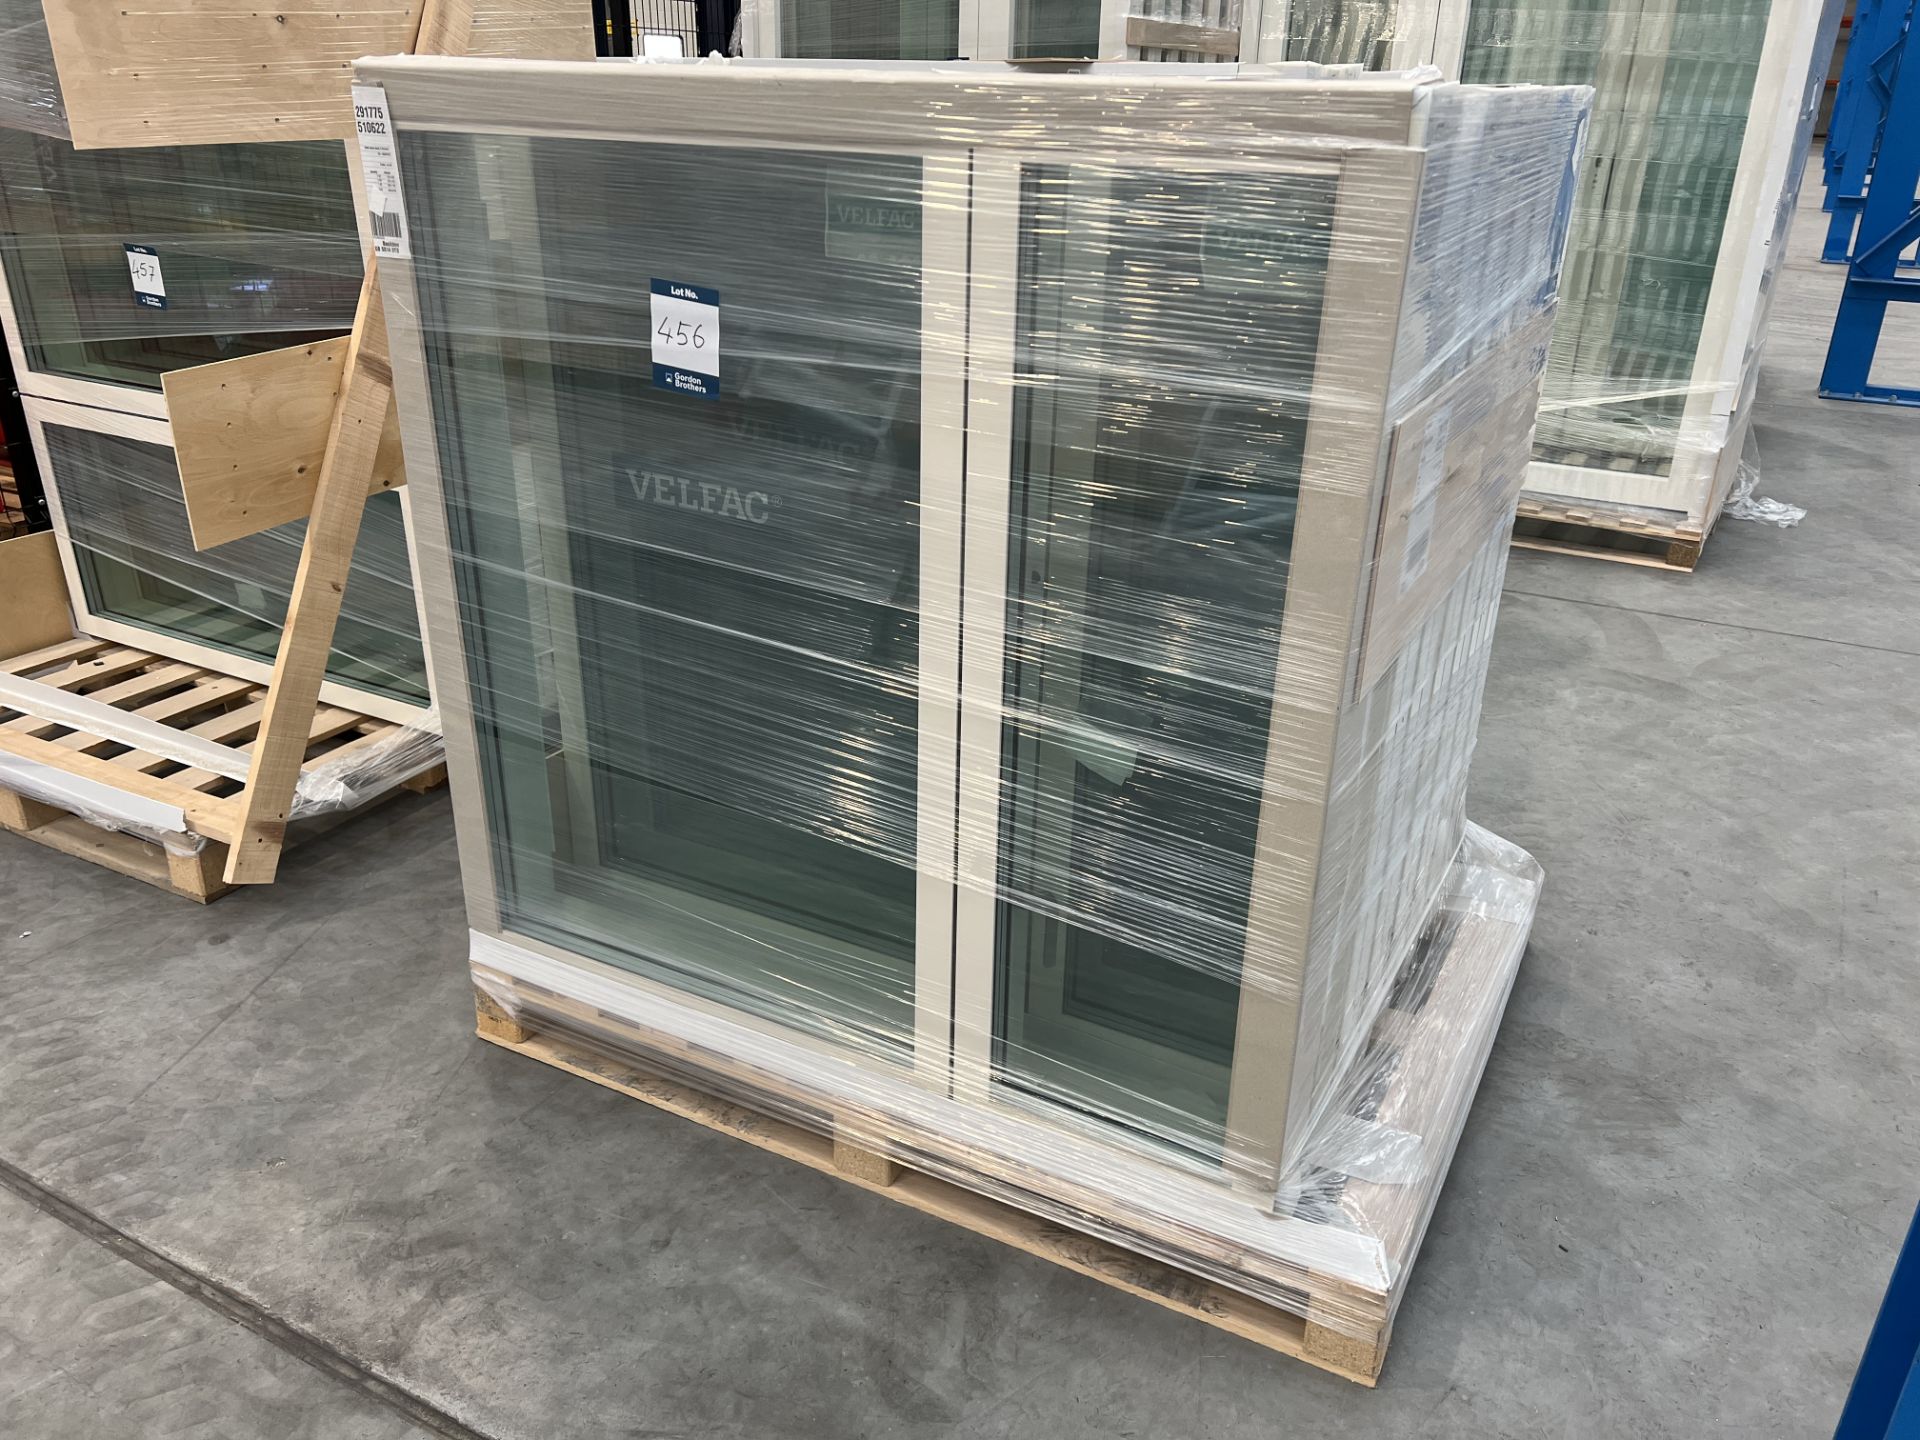 Qty 7 Velfac double glassed window units, size 1340mm (W) x 1297mm (H) as lotted (Unused)